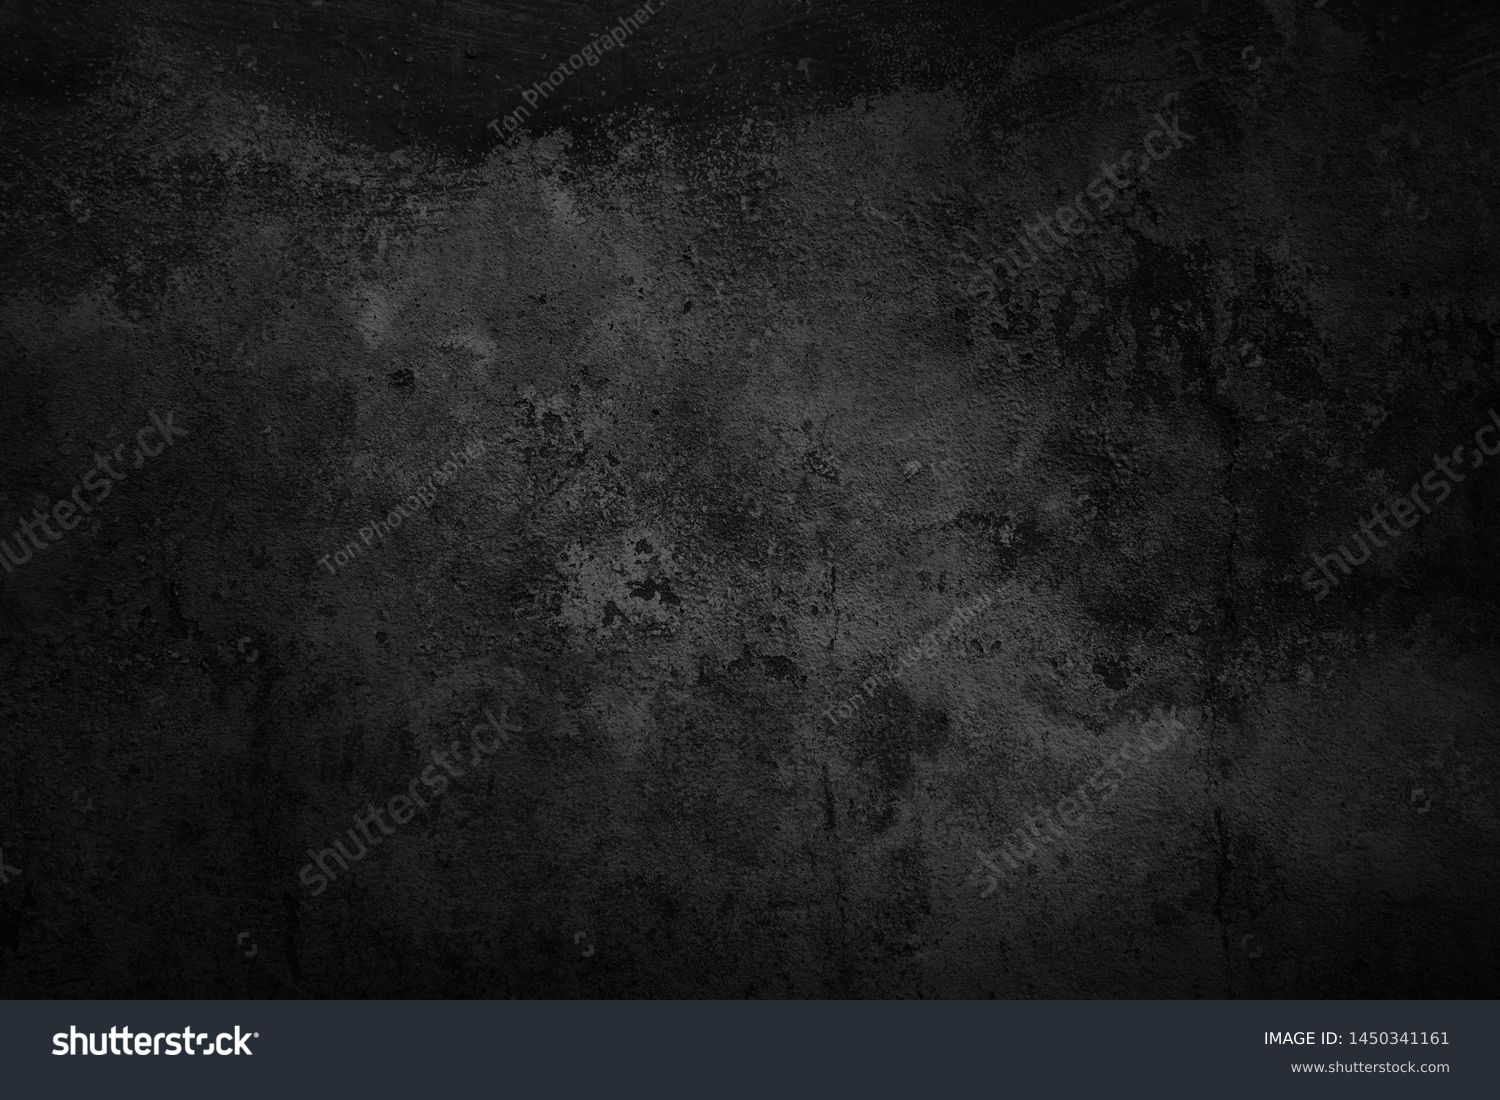 Black wall texture rough background dark concrete floor or old grunge background with black #1450341161